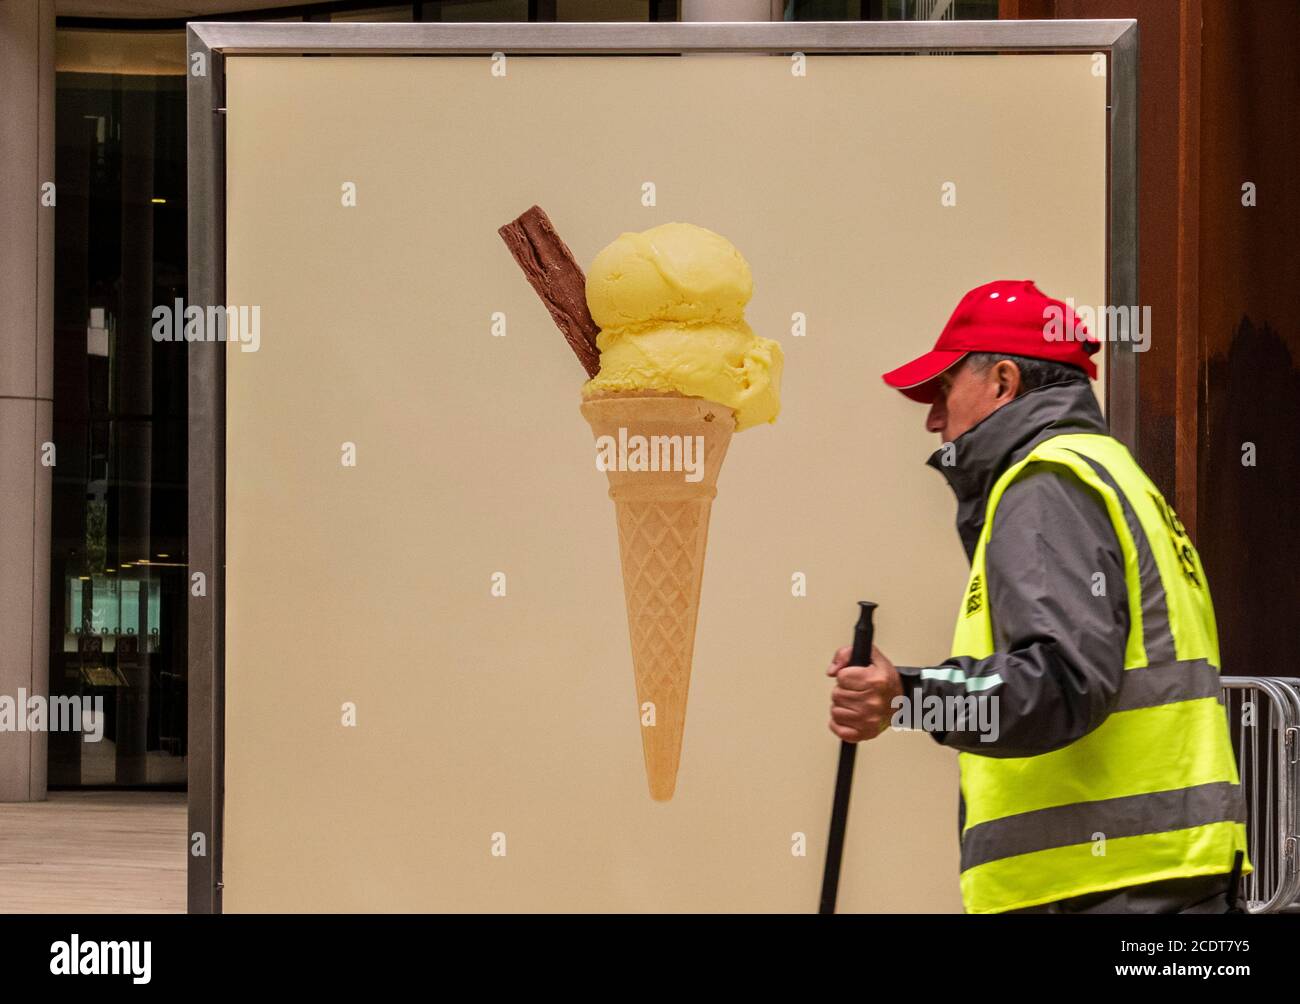 Man wearing high vis vest working by poster with ice cream cone, Kings Cross, London, England Stock Photo